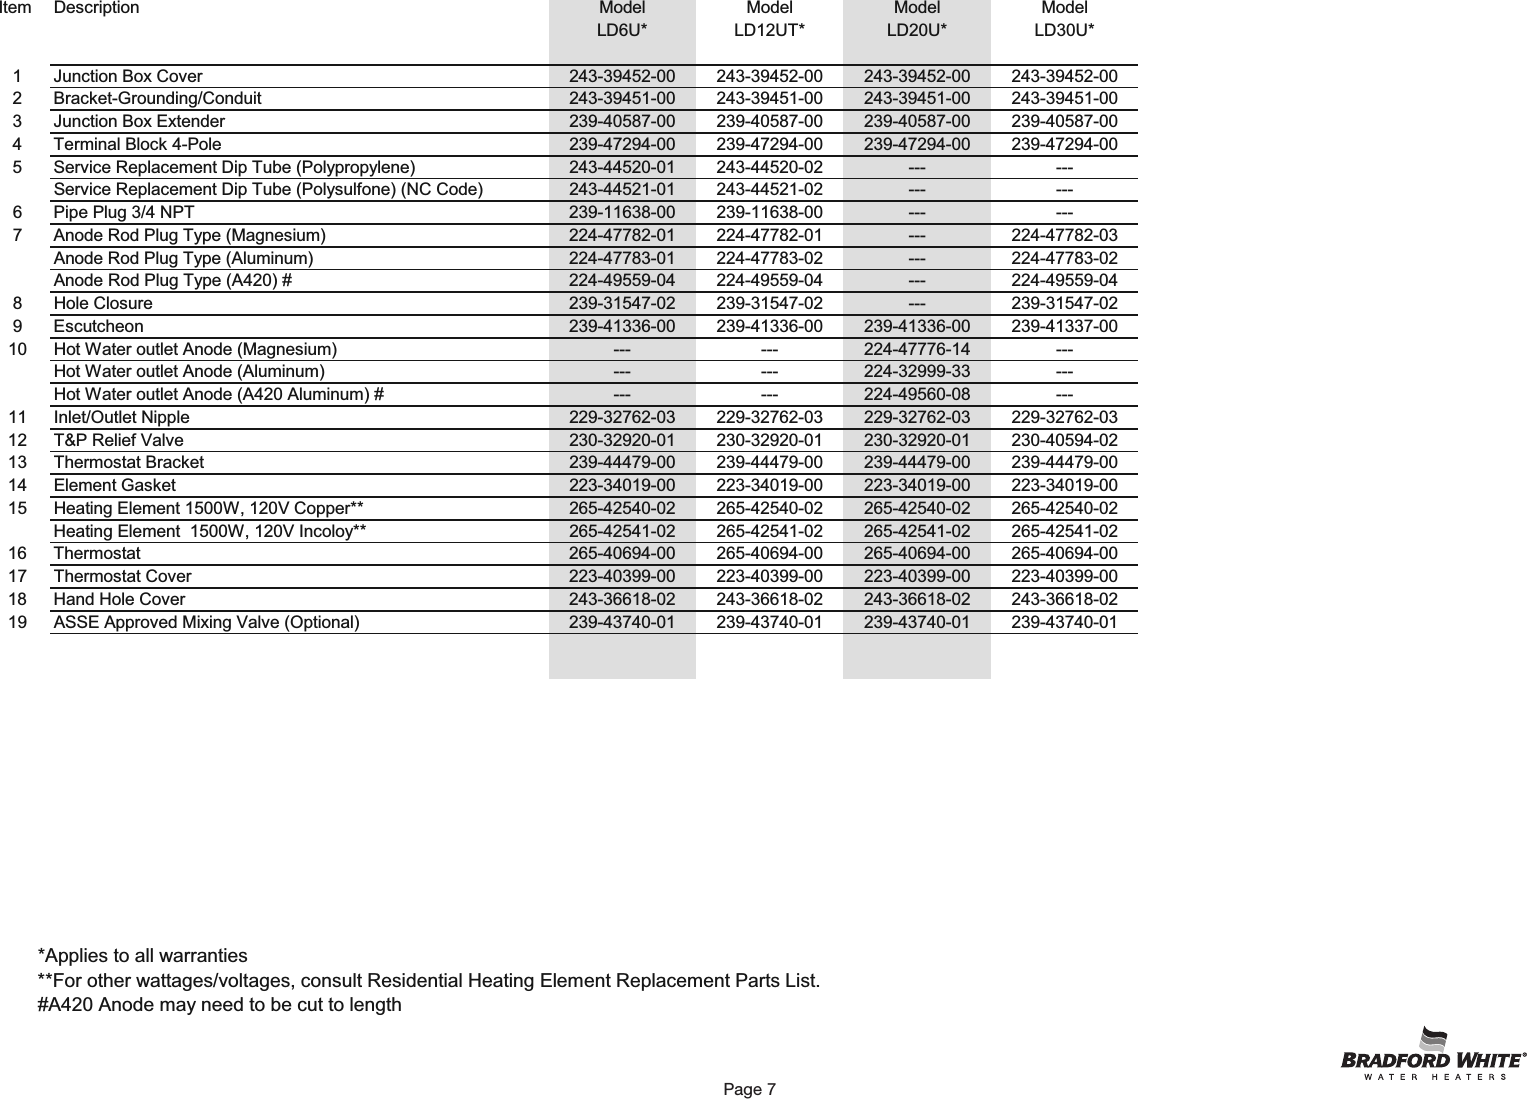 Page 7 of 12 - Bradfordwhite Canada Commercial Electric Utility Ld Partslist 44518 29437_44518e_parts_parts_list User Manual